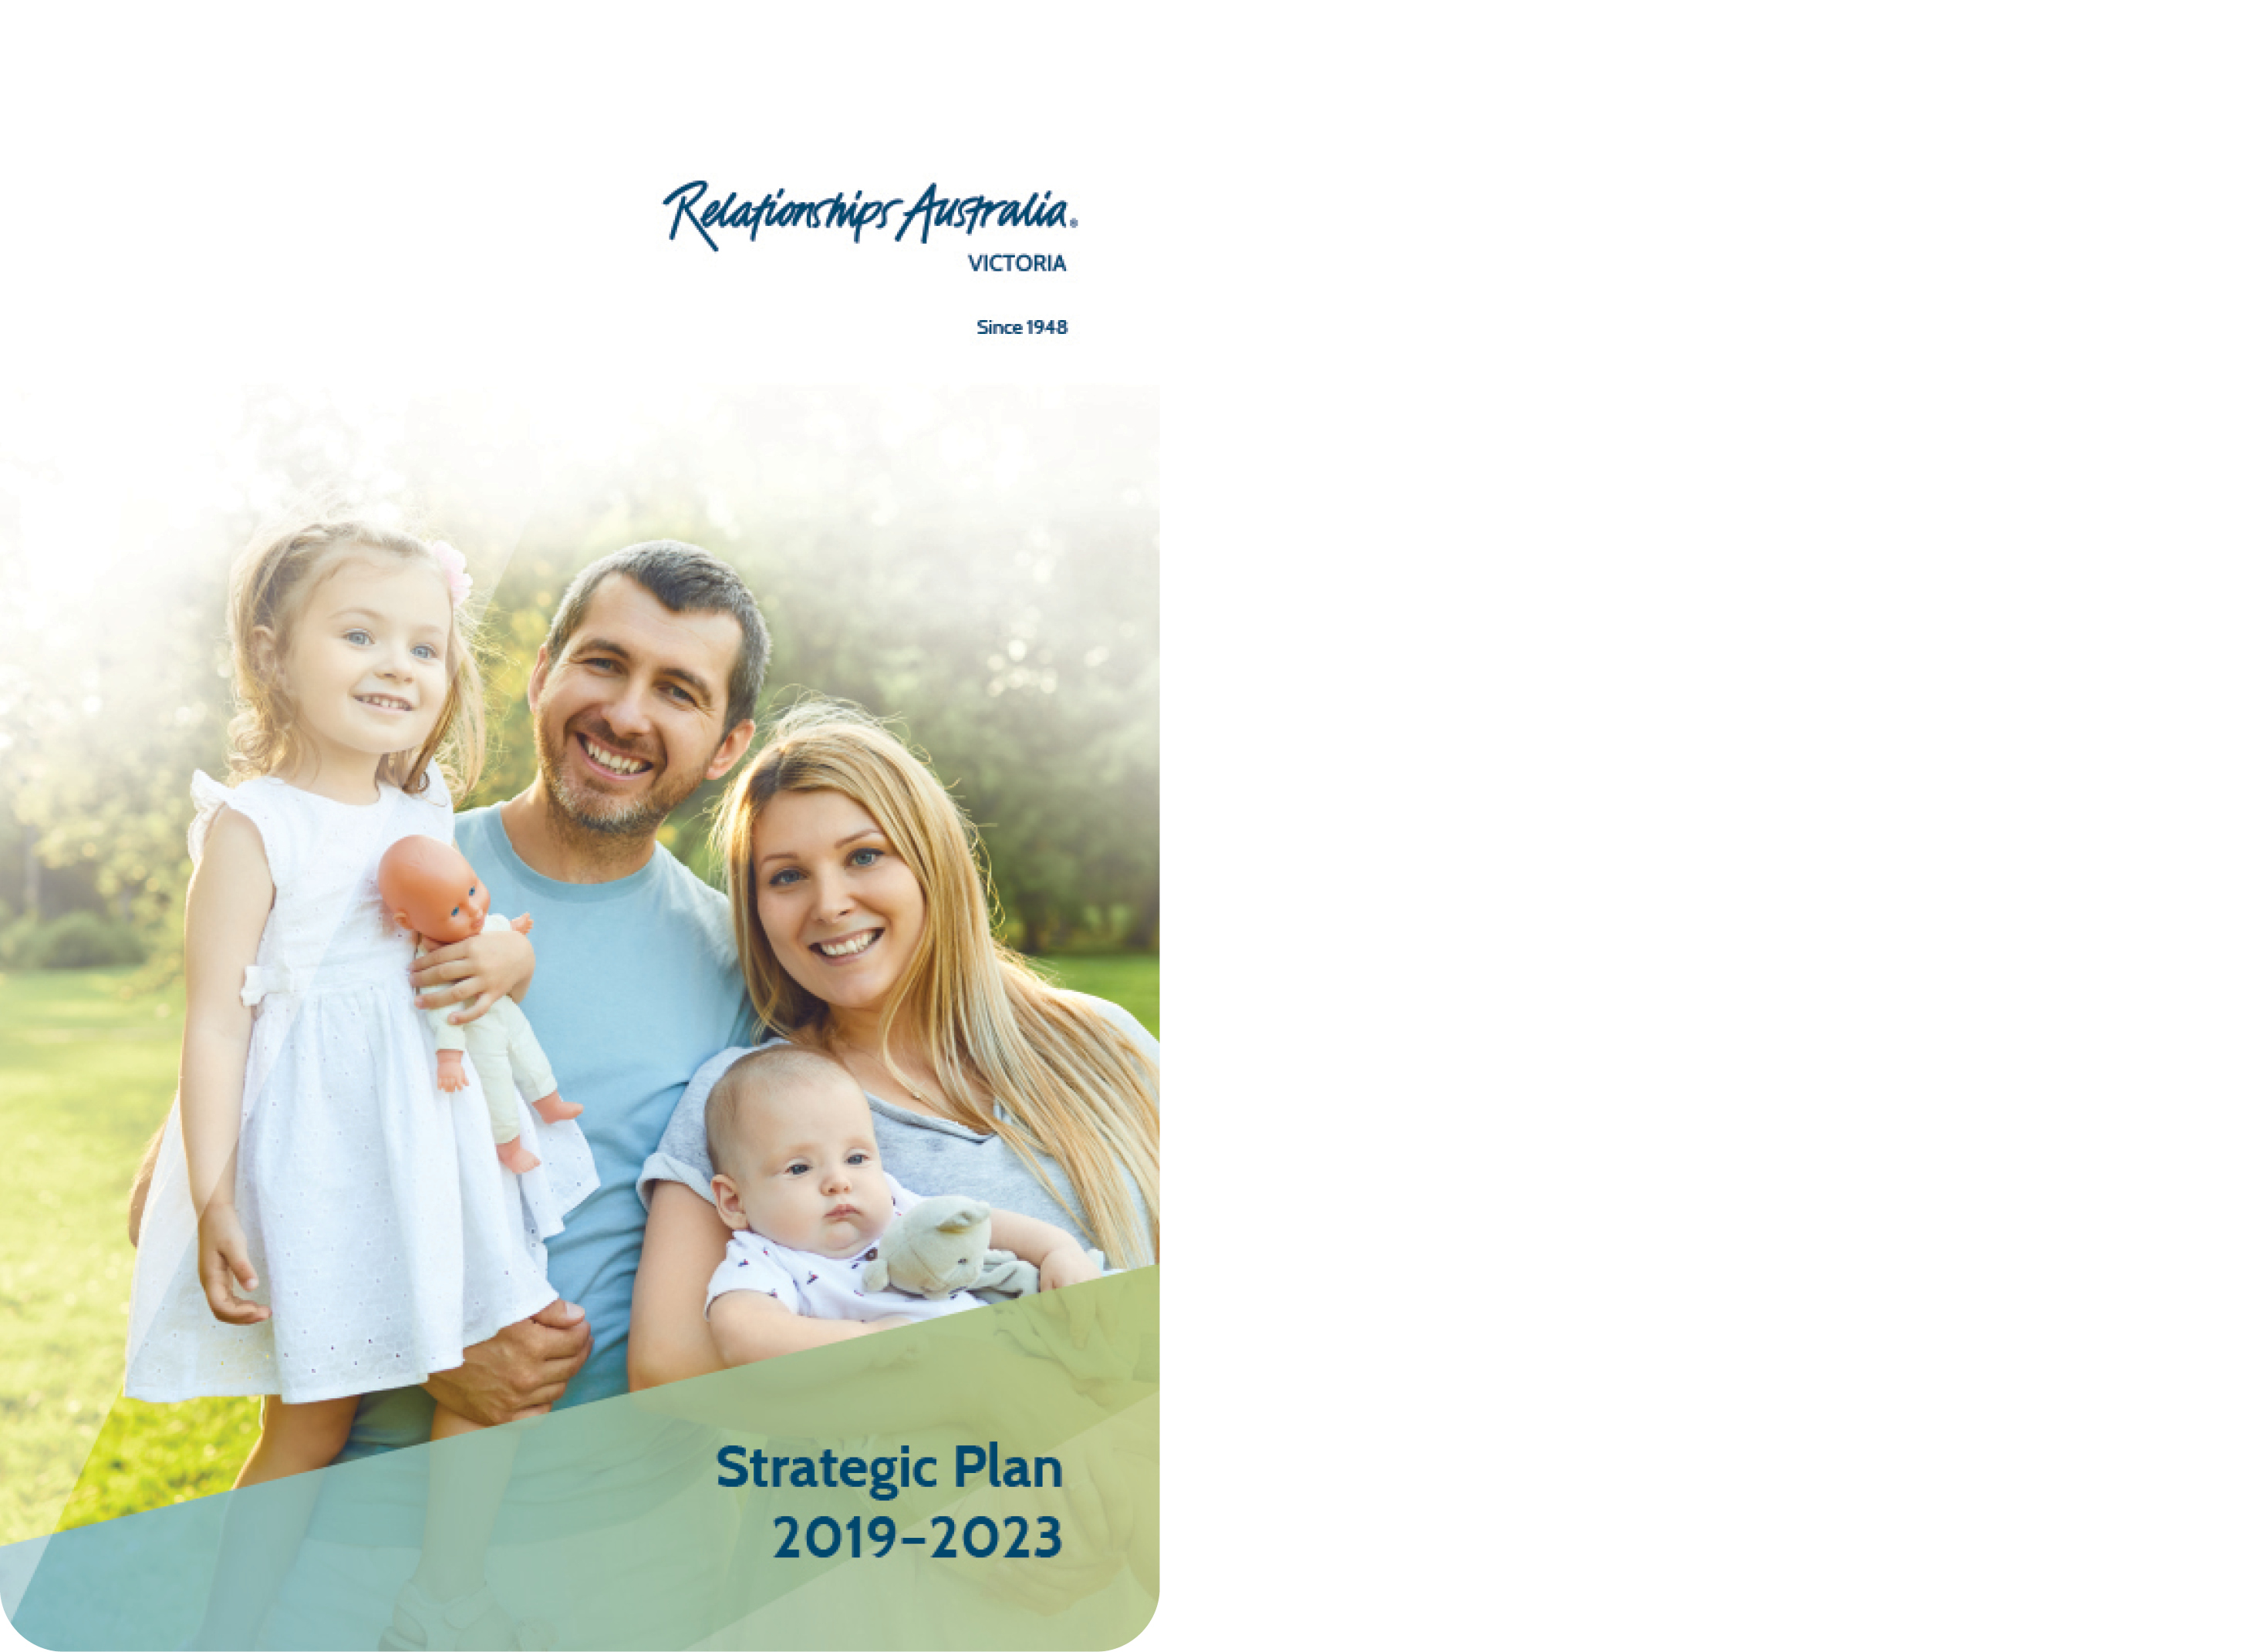 A thumbnail image of the RAV Strategic Plan 2019-2023 cover, featuring a photo of a happy, young, Caucasian family in a park